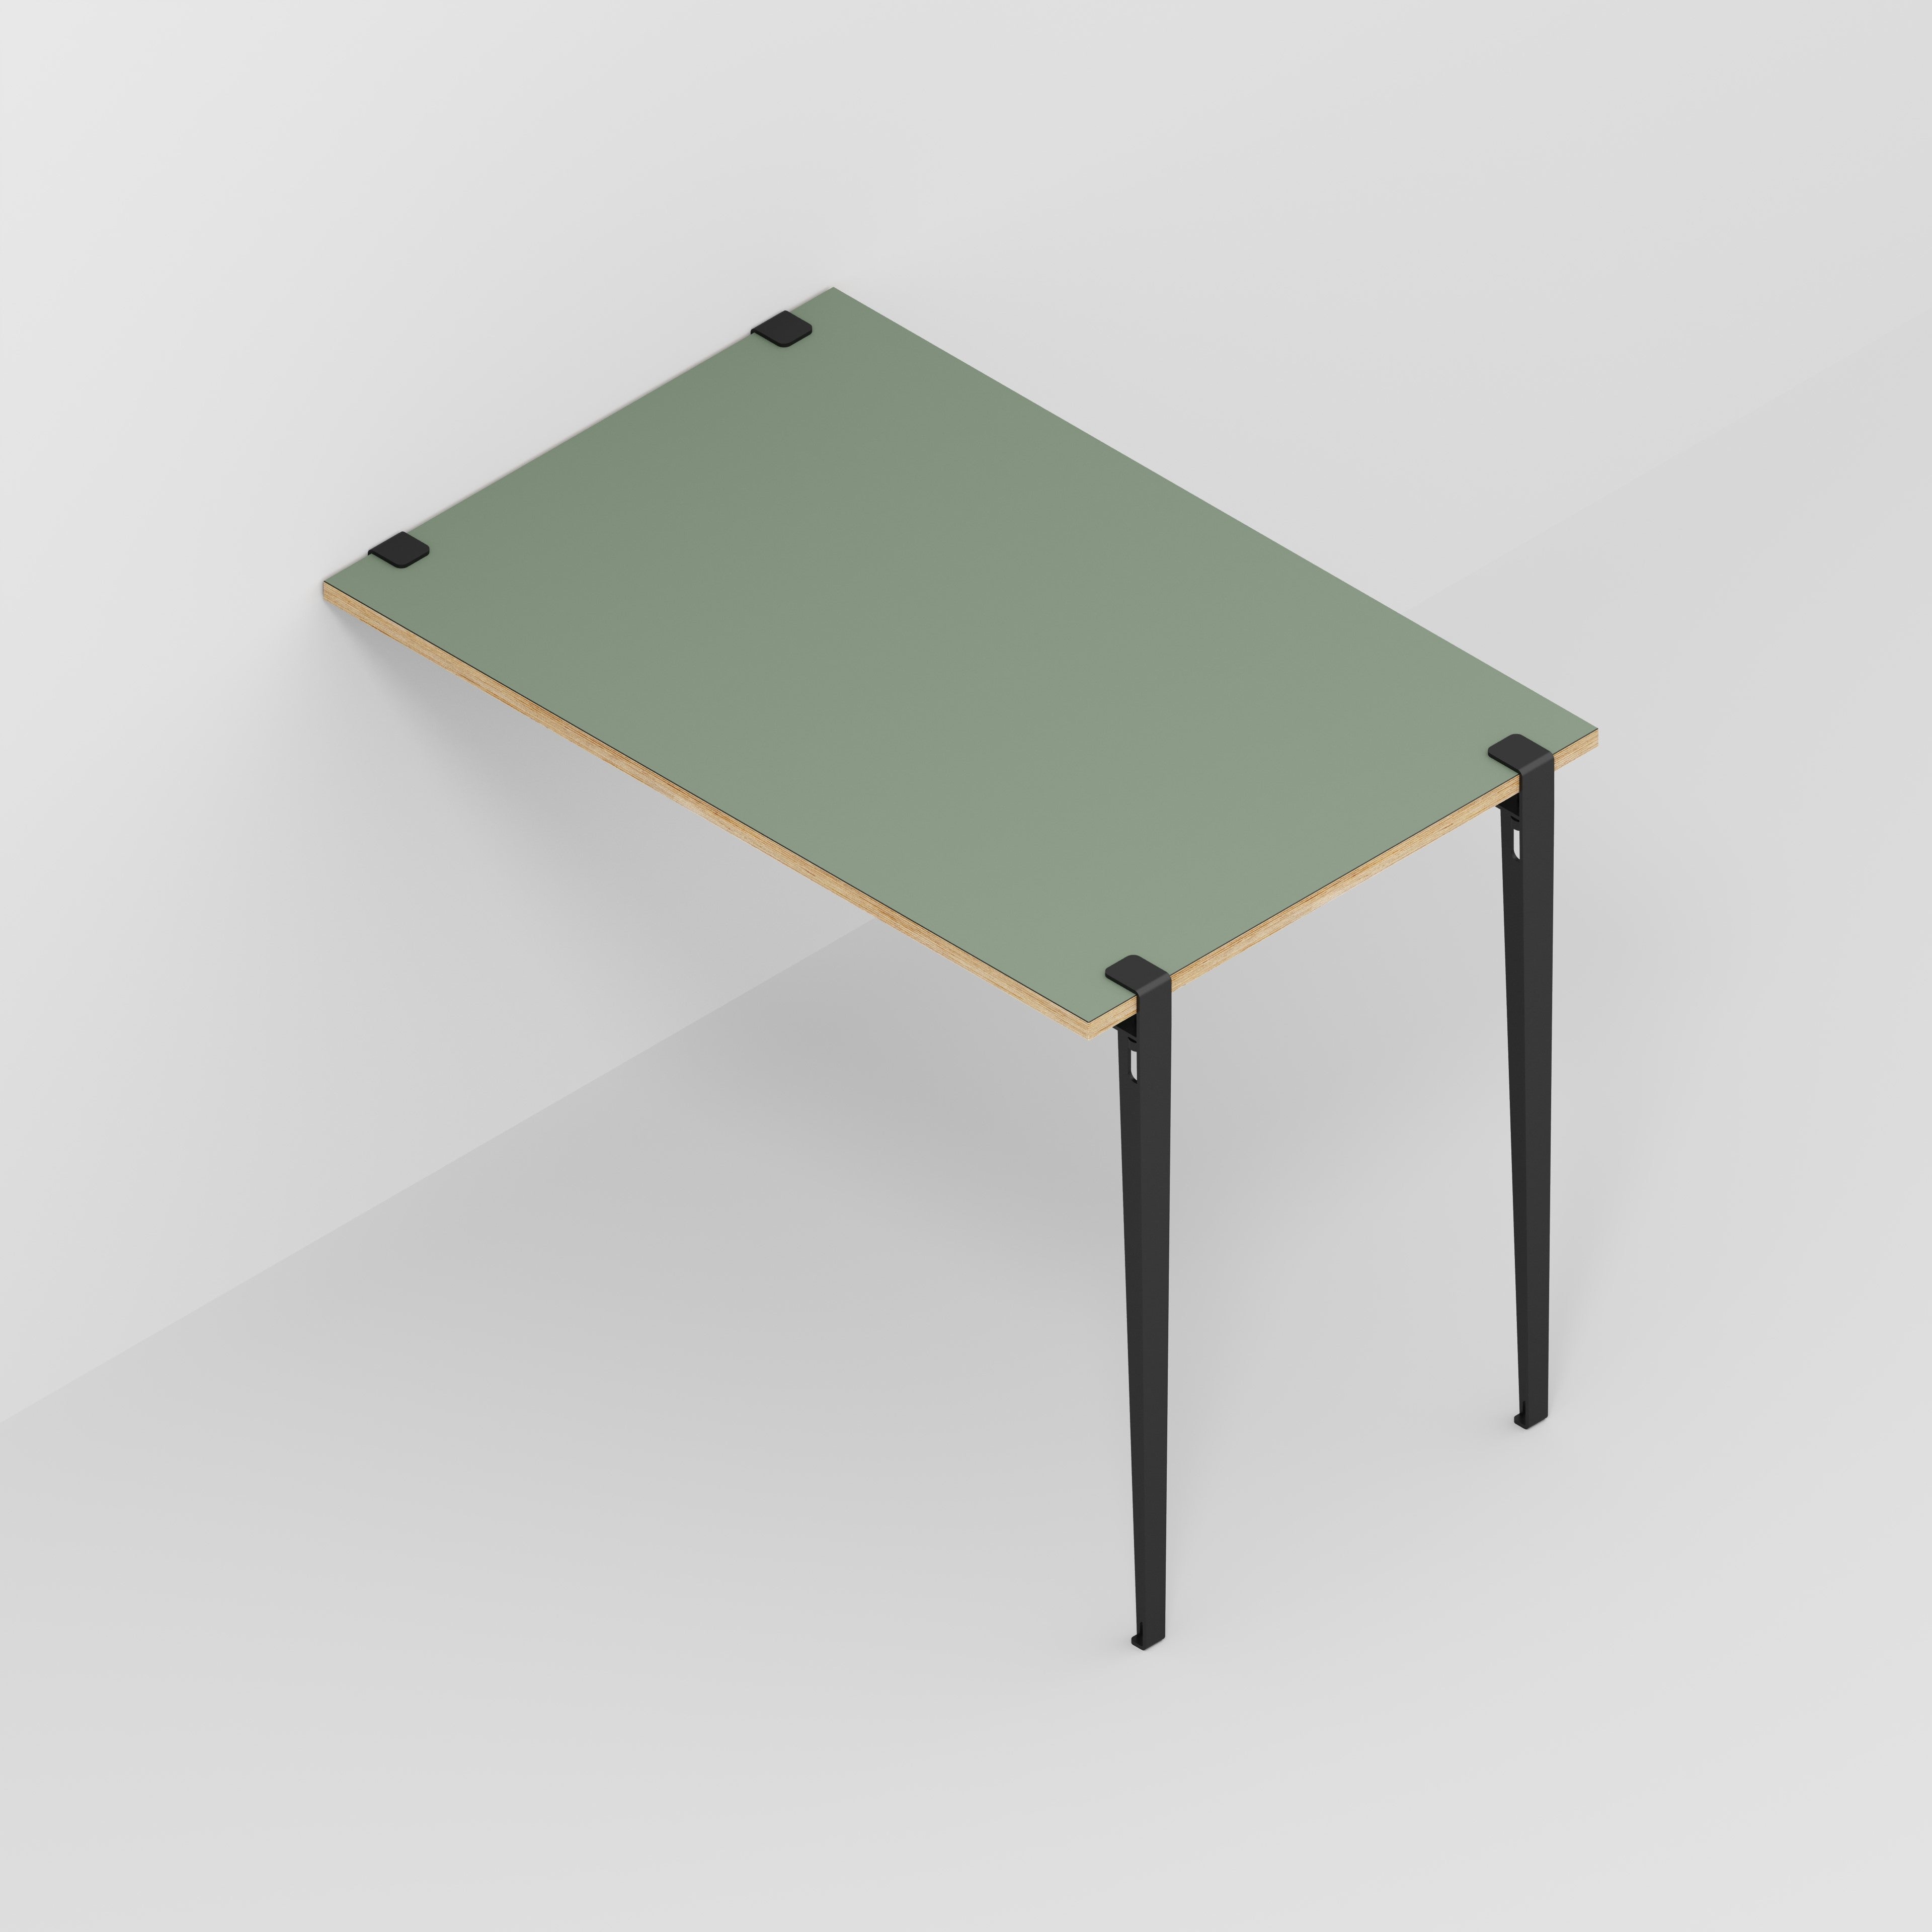 Wall Table with Black Tiptoe Legs and Brackets - Formica Green Slate - 1200(w) x 800(d) x 900(h)